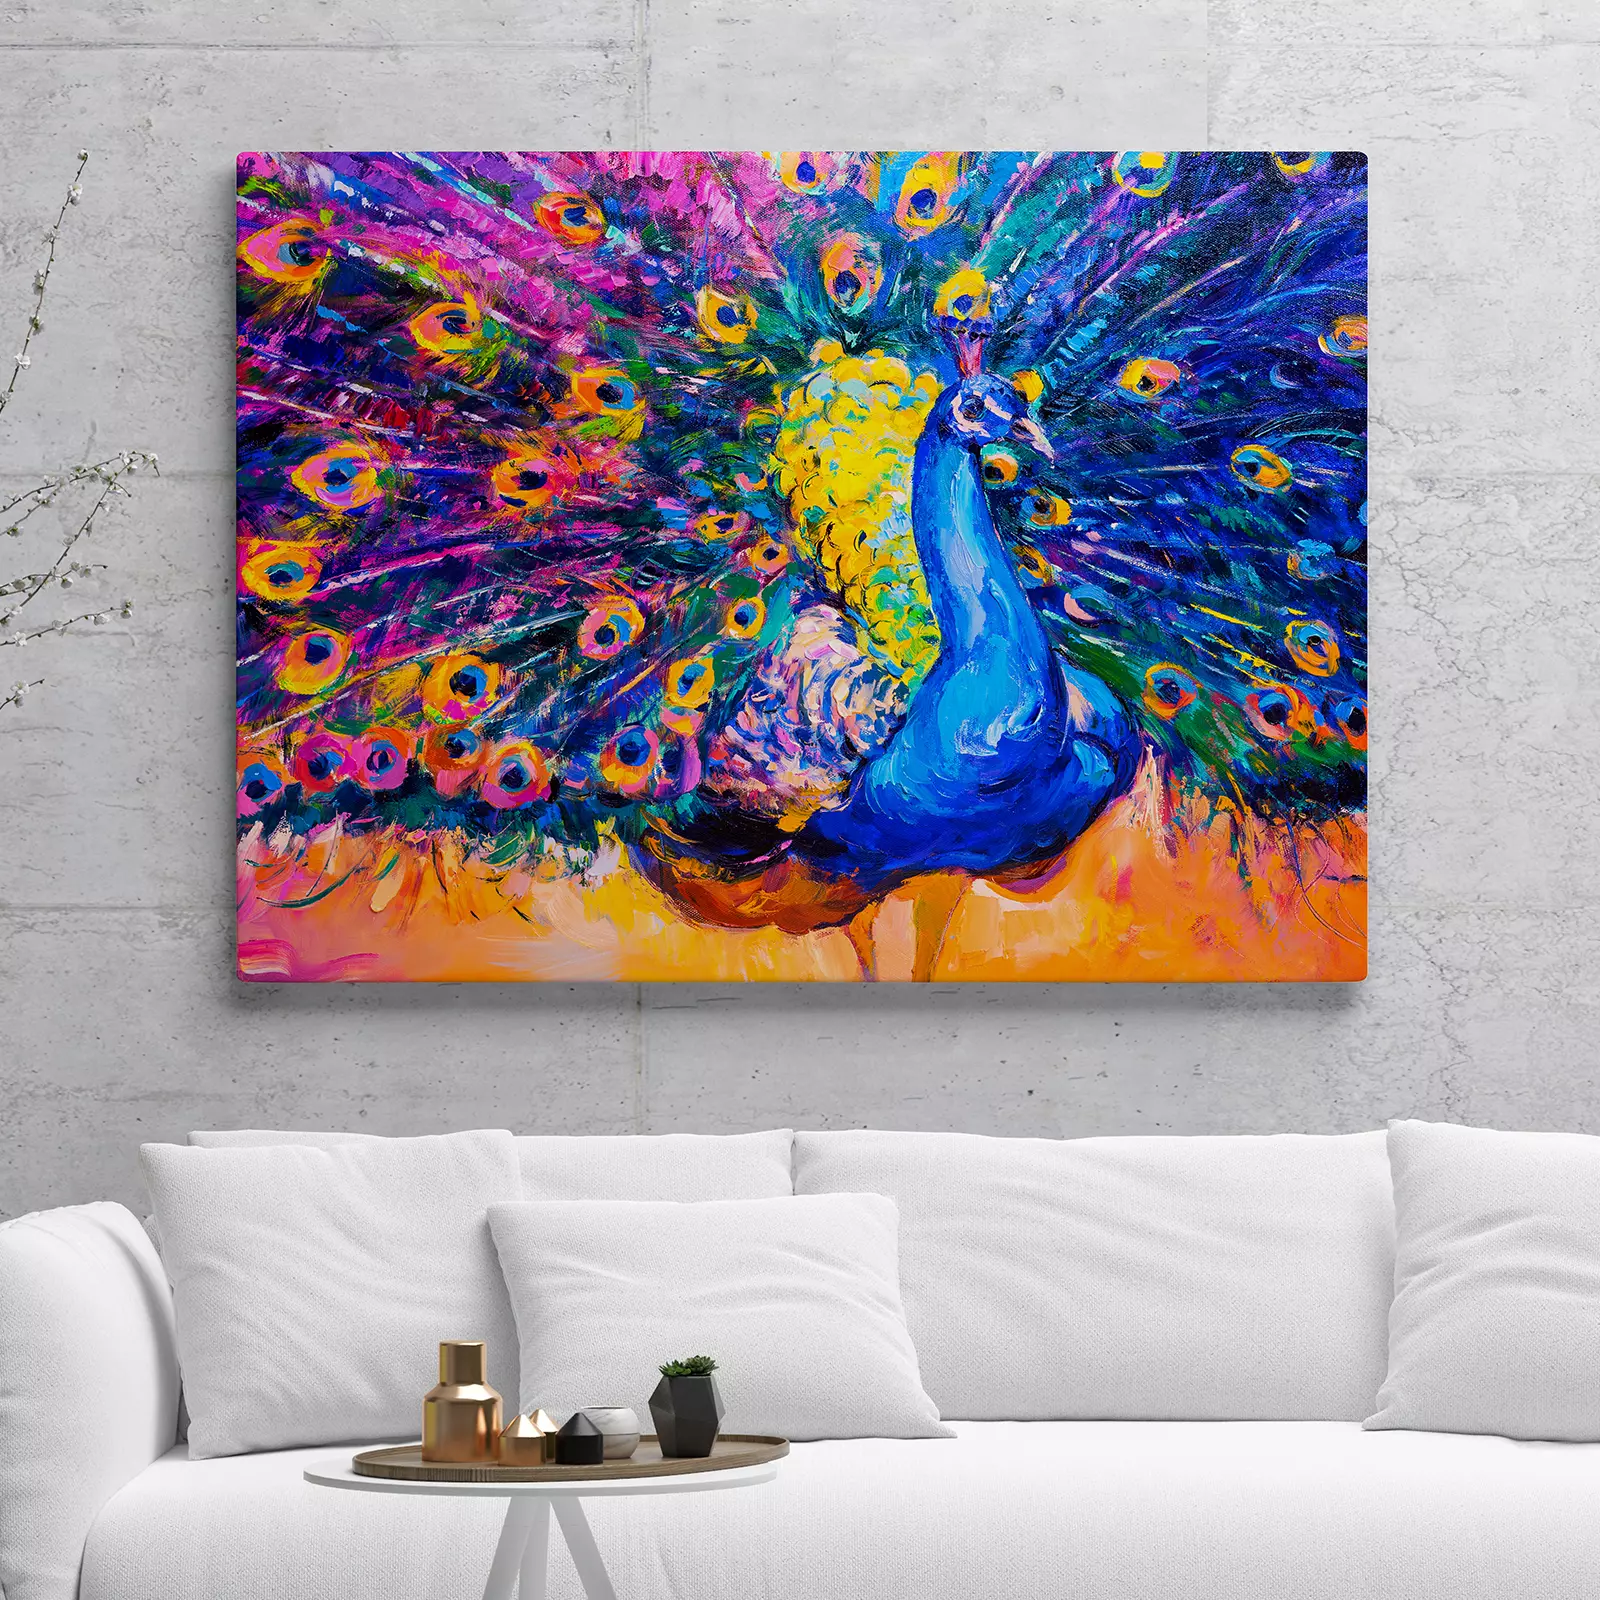 Oil Painting On Canvas. Colorful Peacock. Modern Art – Merawalaprint ...